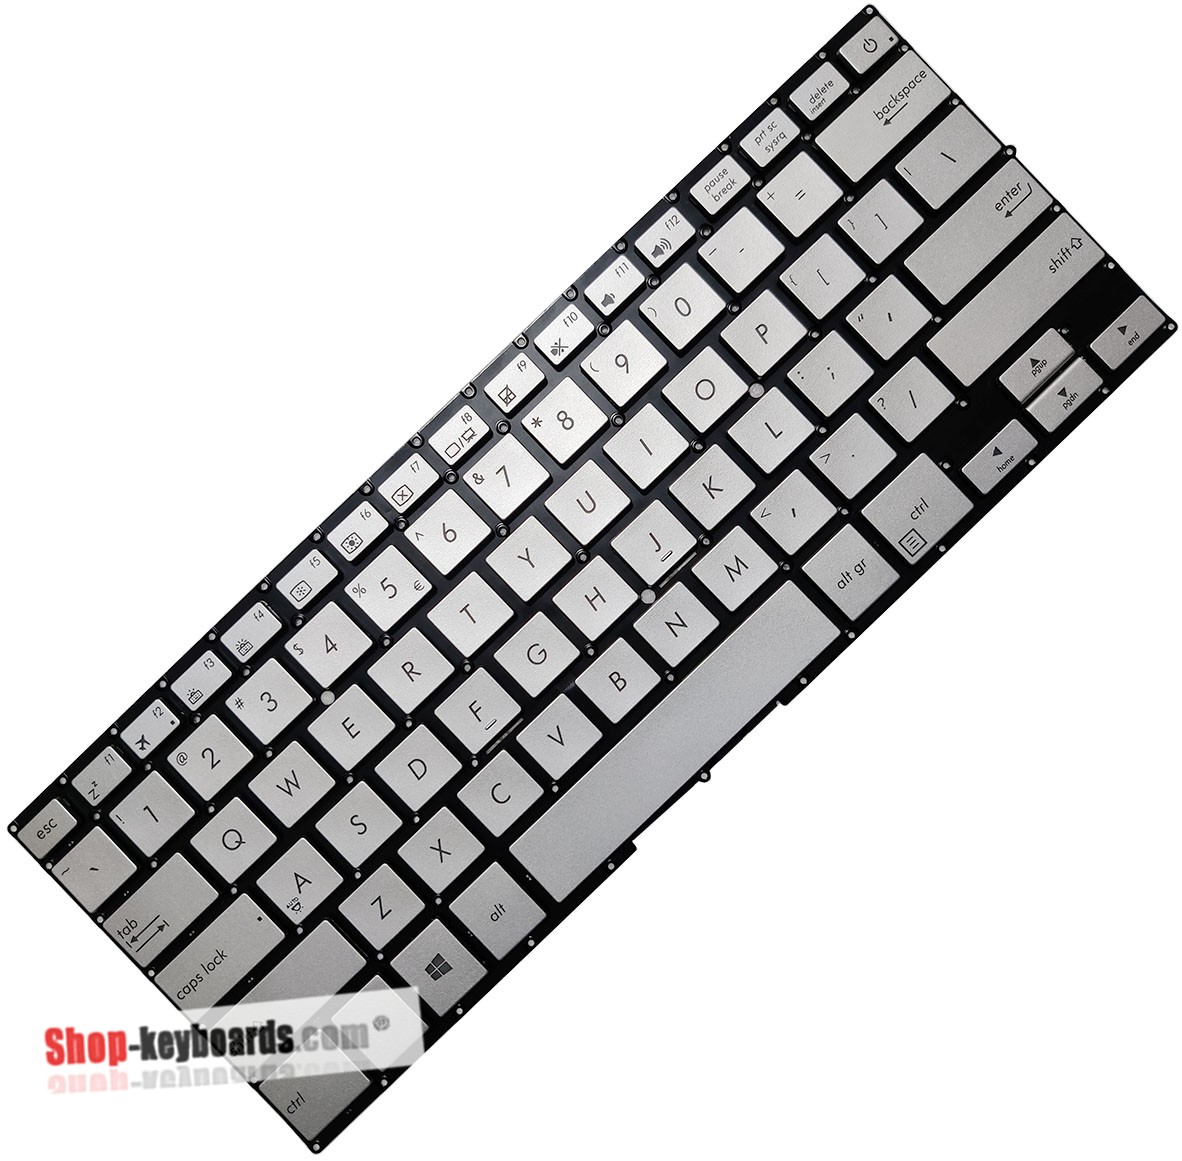 Asus 0KNB0-D620UI00 Keyboard replacement